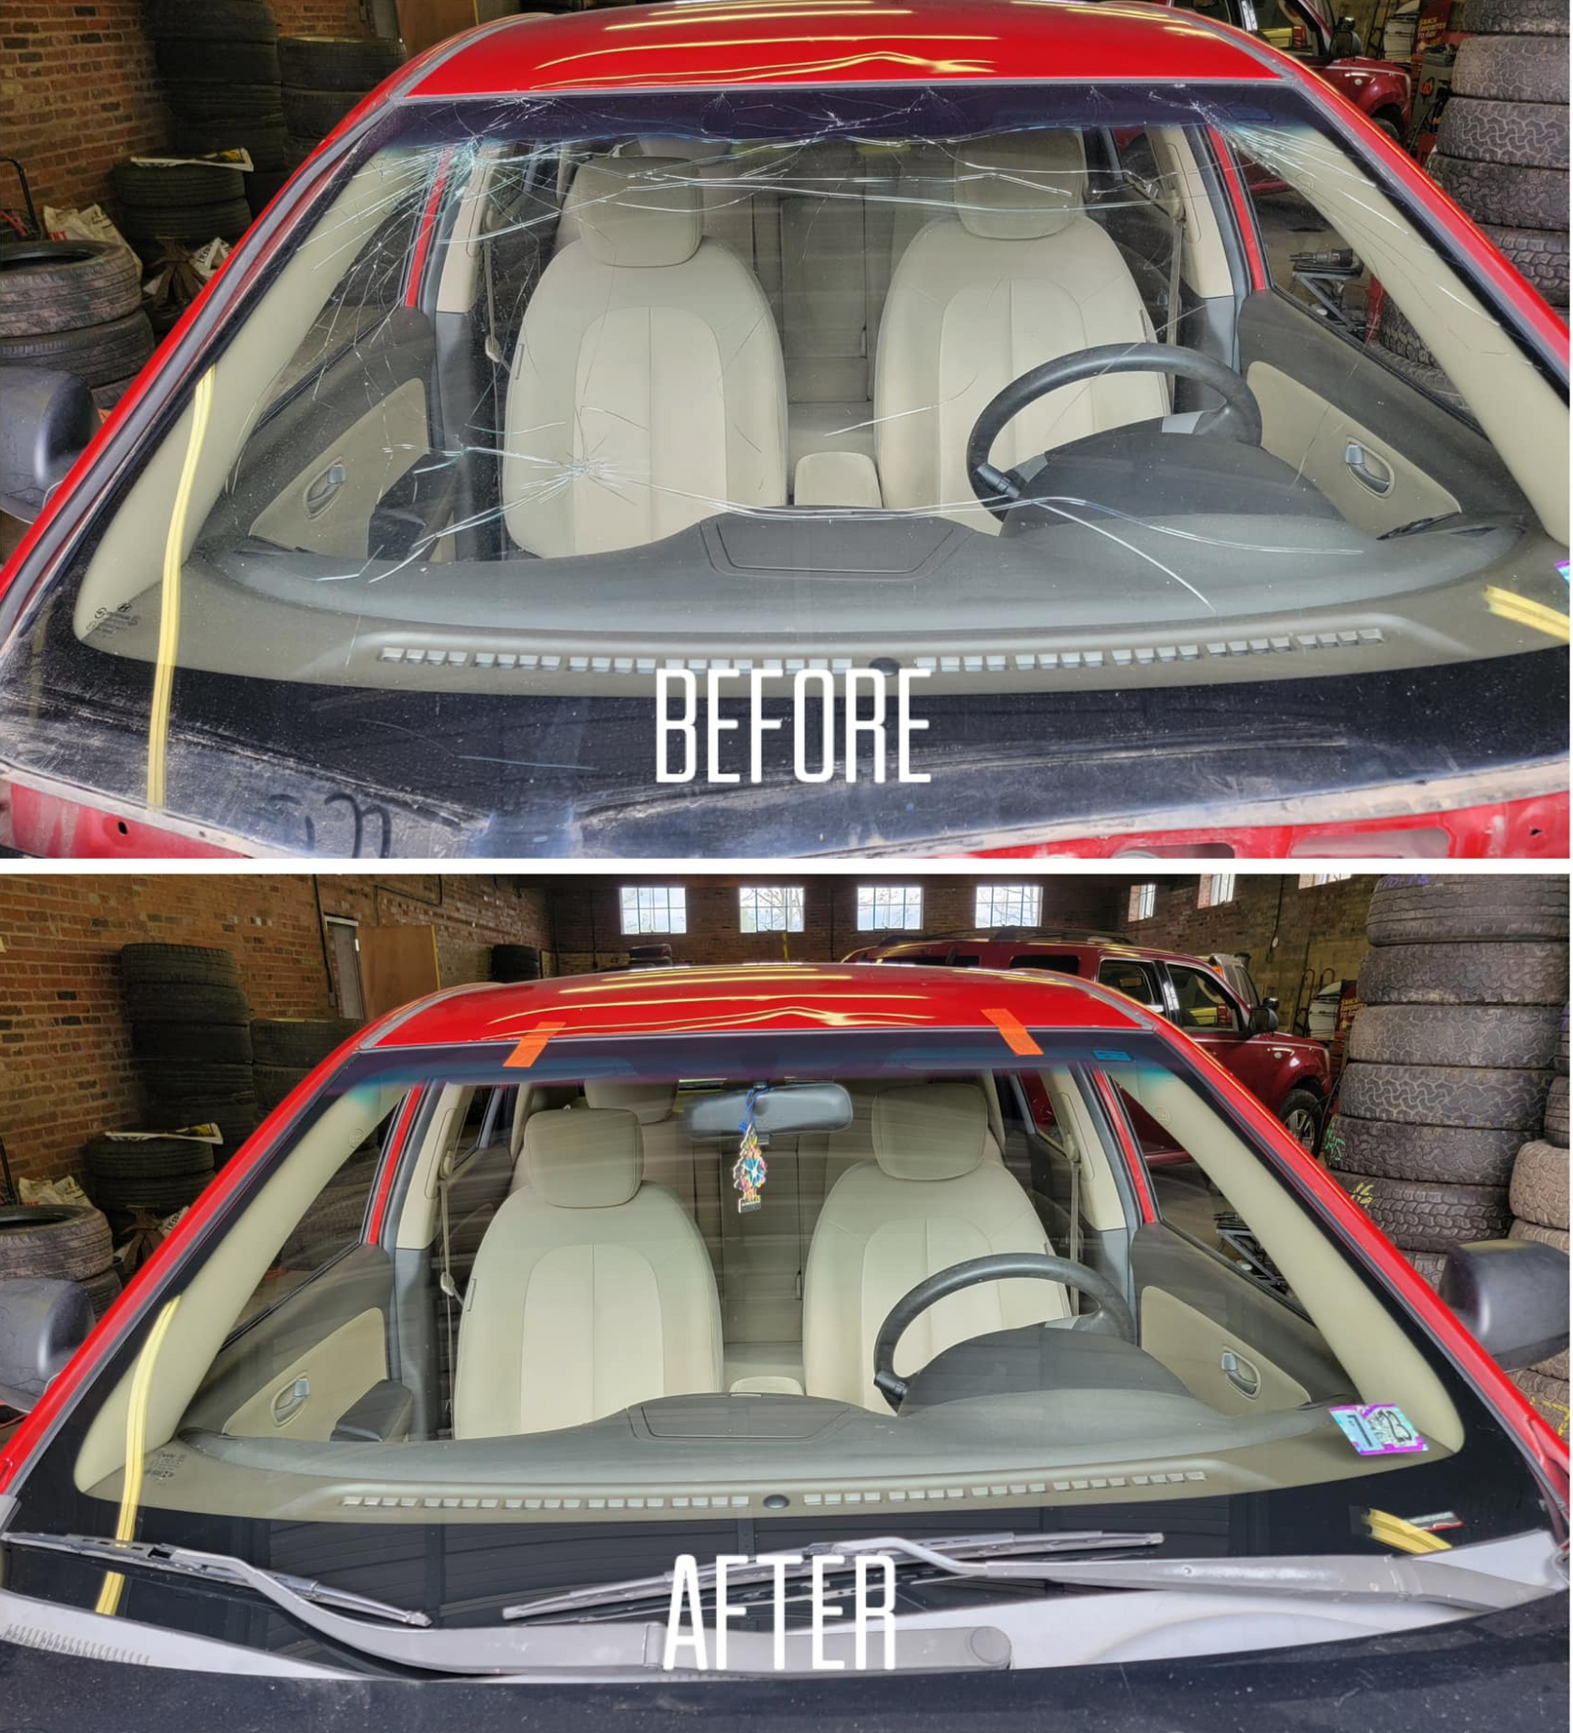 a before and after picture of a red car